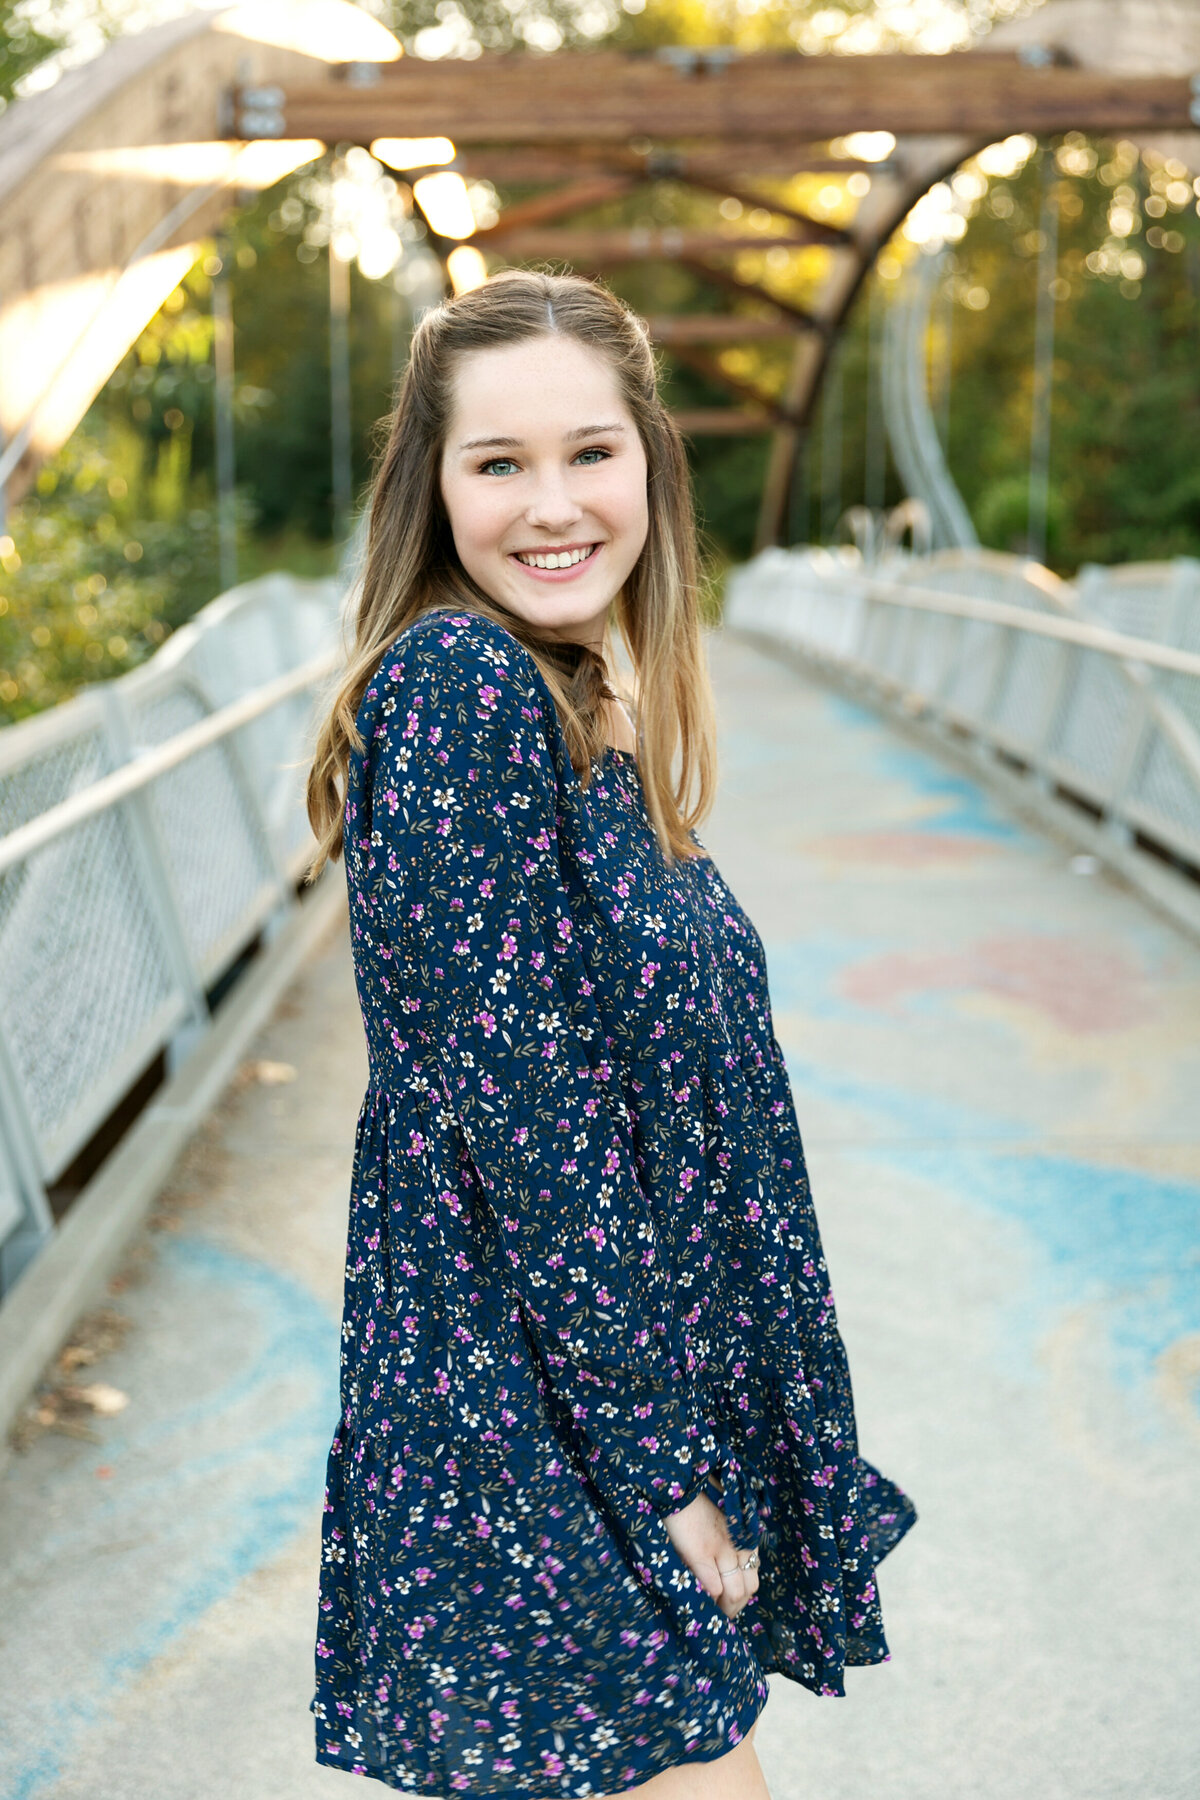 issaquah-bellevue-seattle-senior-girls-teens-pictures-nancy-chabot-photography-252